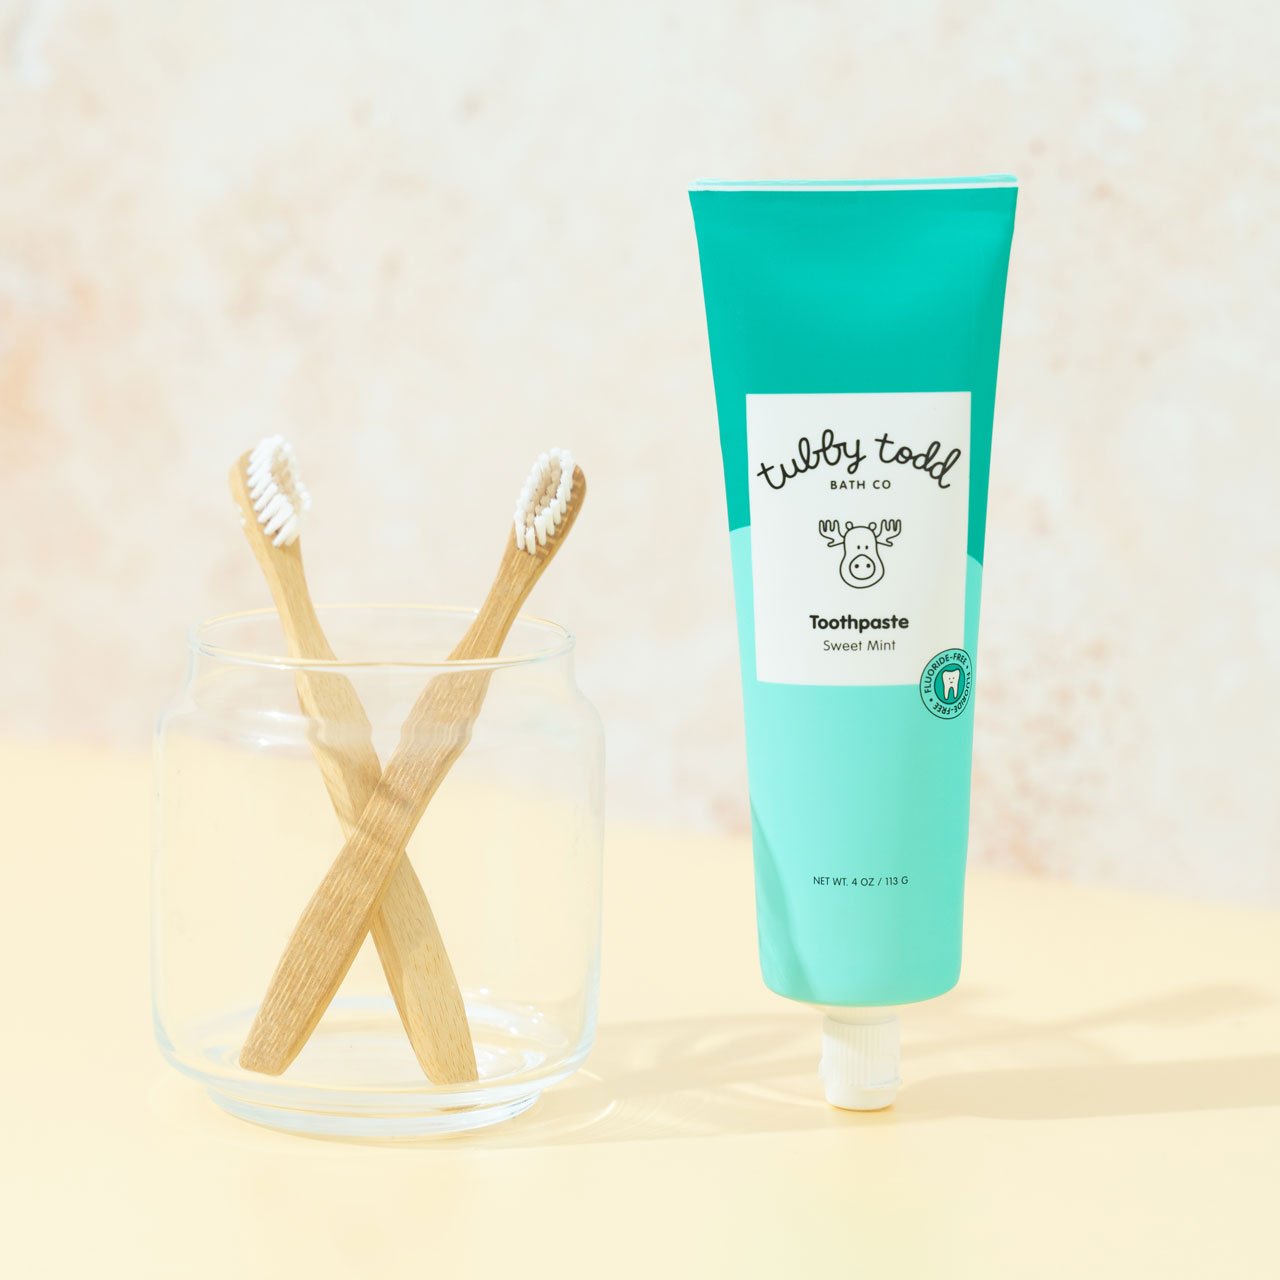 Sweet Mint Toothpaste next to jar with kids' bamboo toothbrushes